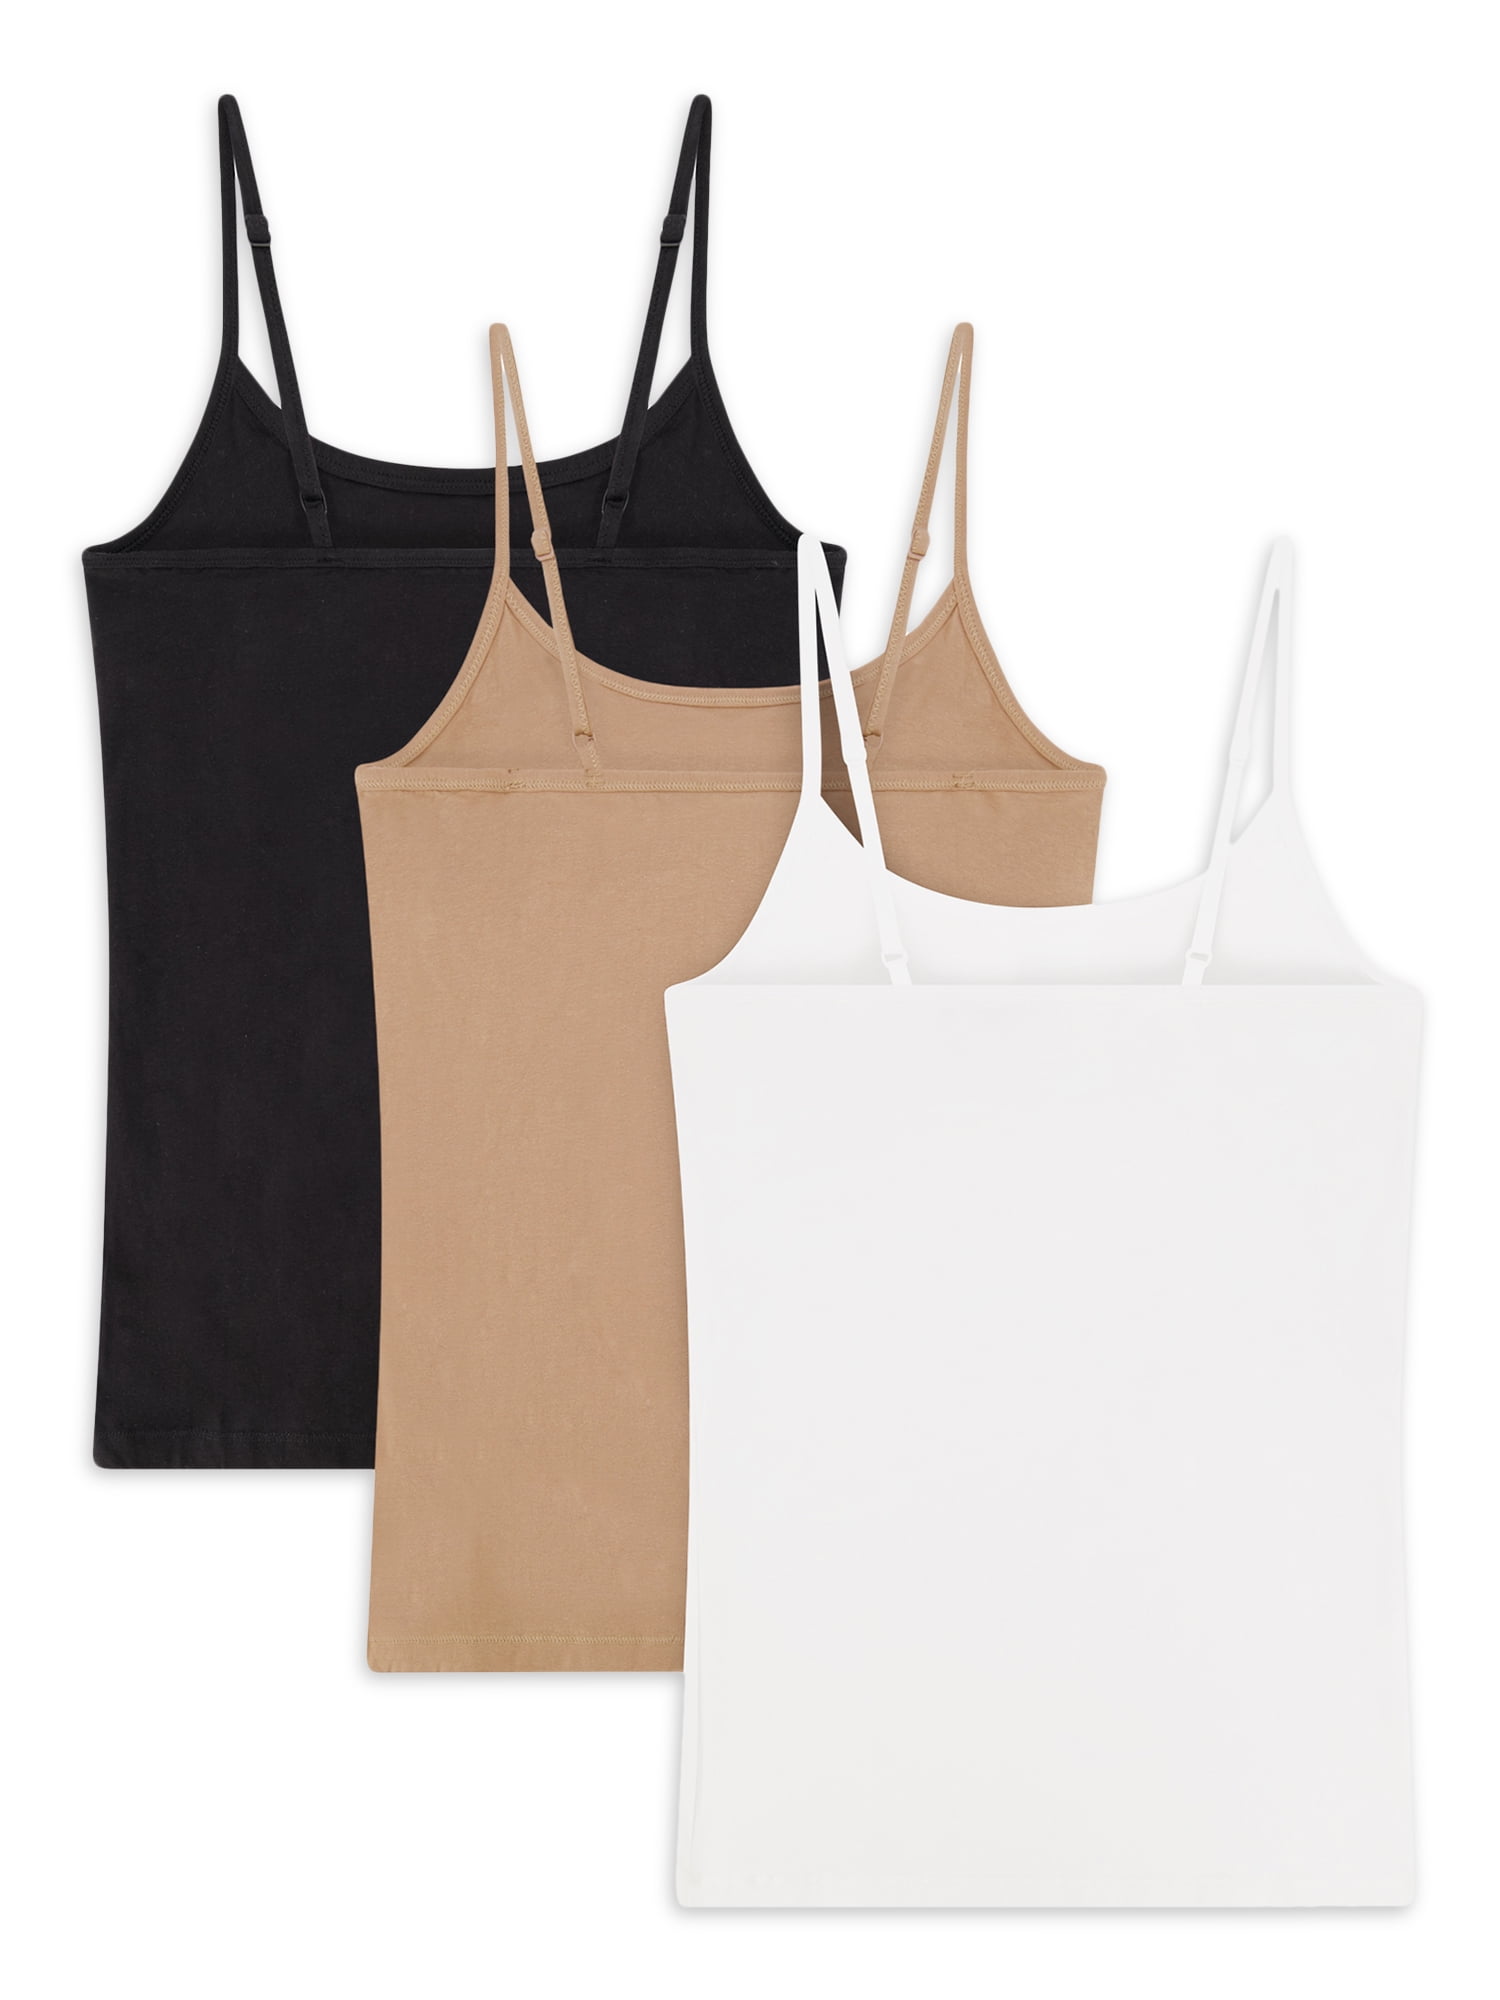 Best Fitting Panty Cotton Tunic Camisole Adjustable Spaghetti Strap Tank Top,  3 Pack 